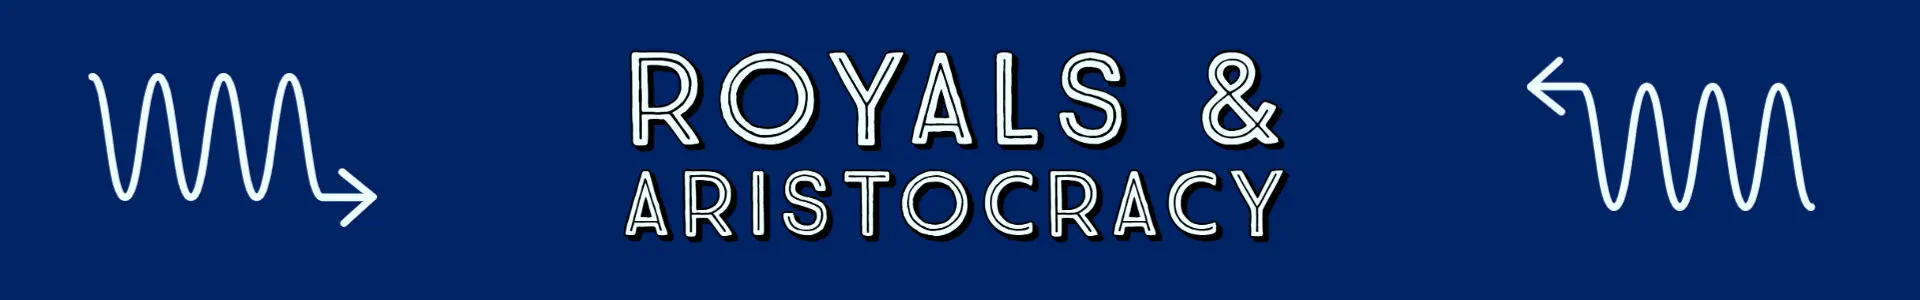 Royals and Aristocracy